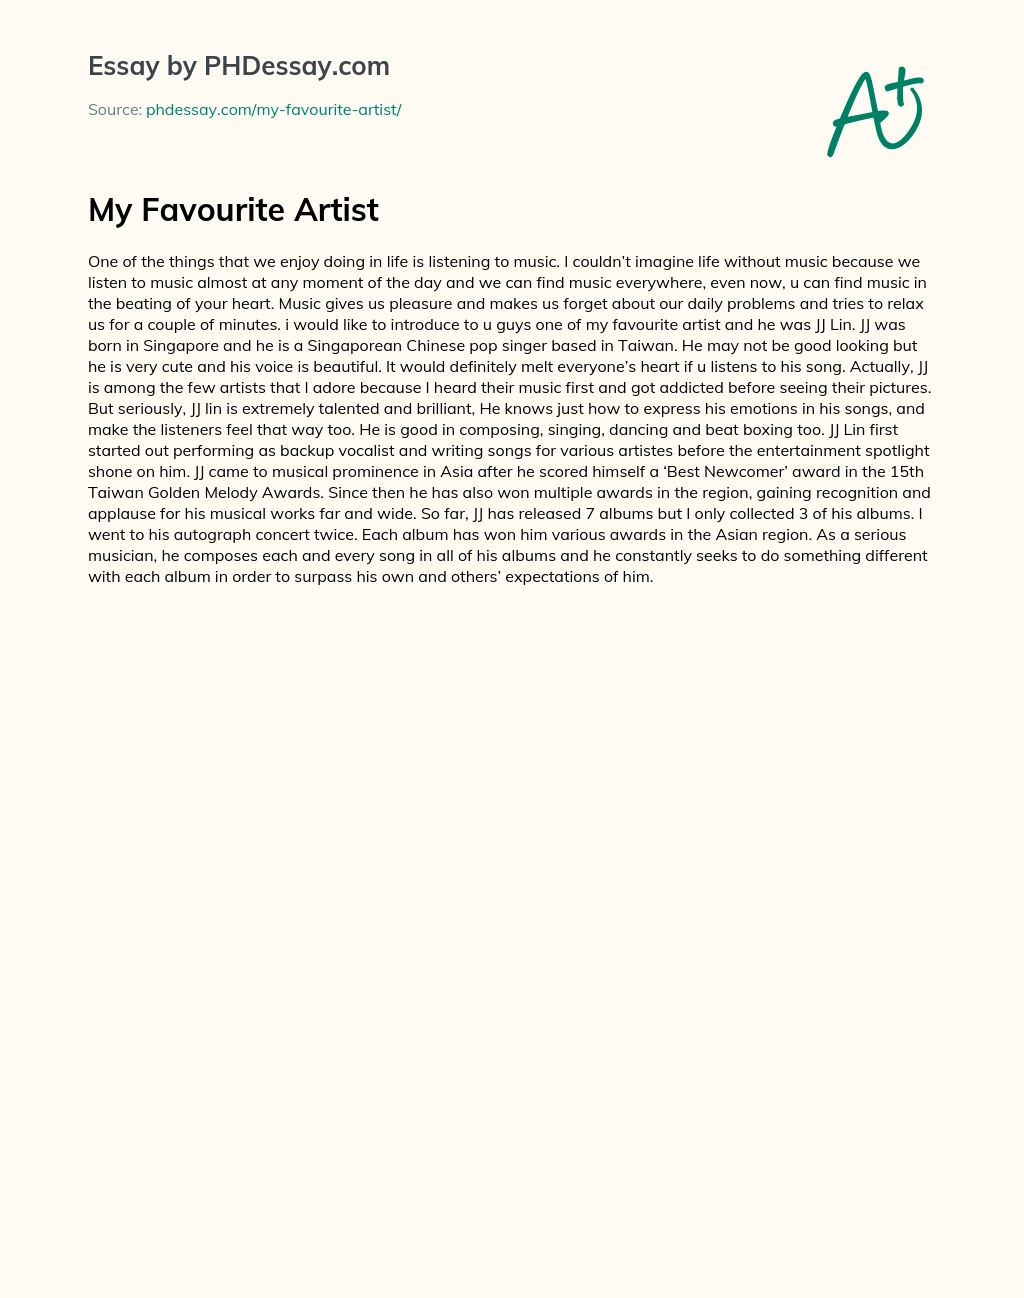 essay about your favorite artist